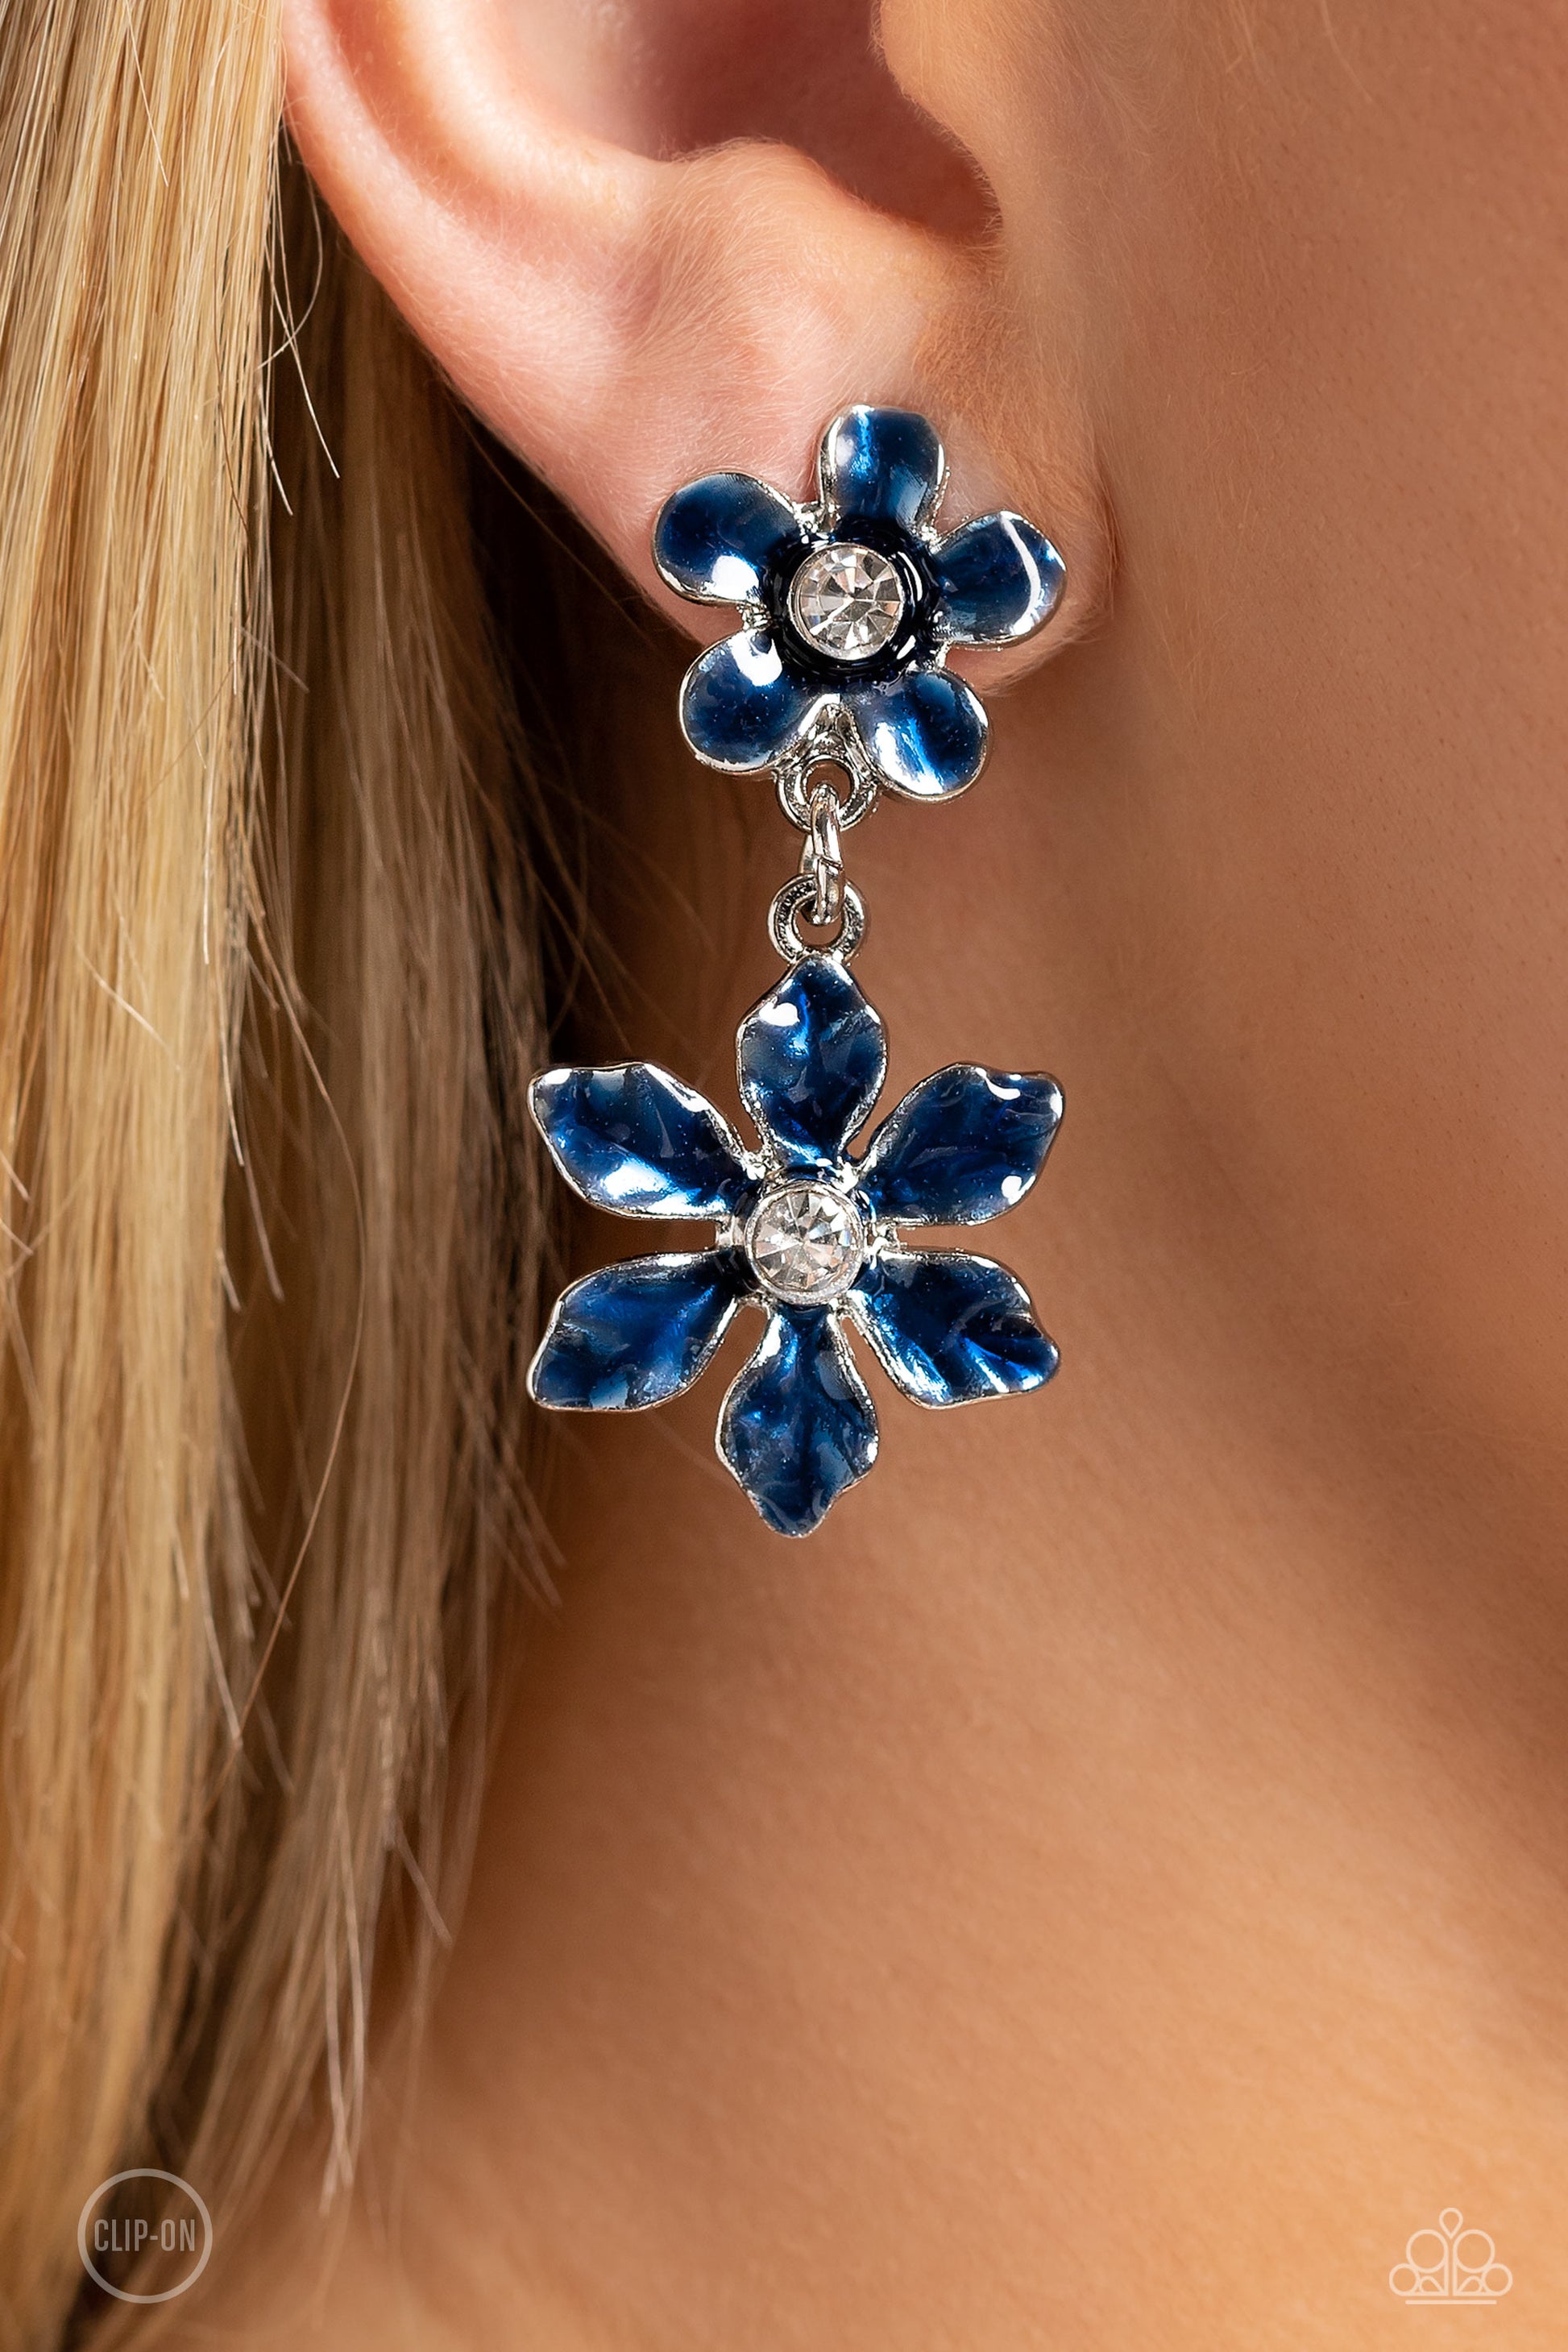 Paparazzi Accessories Transparent Talent - Blue *Clip-On A navy transparent flower with pinched petals blooms around a glittery white gem center. The large flower swings from a second transparent navy flower, featuring a smaller size with fanned-out petal